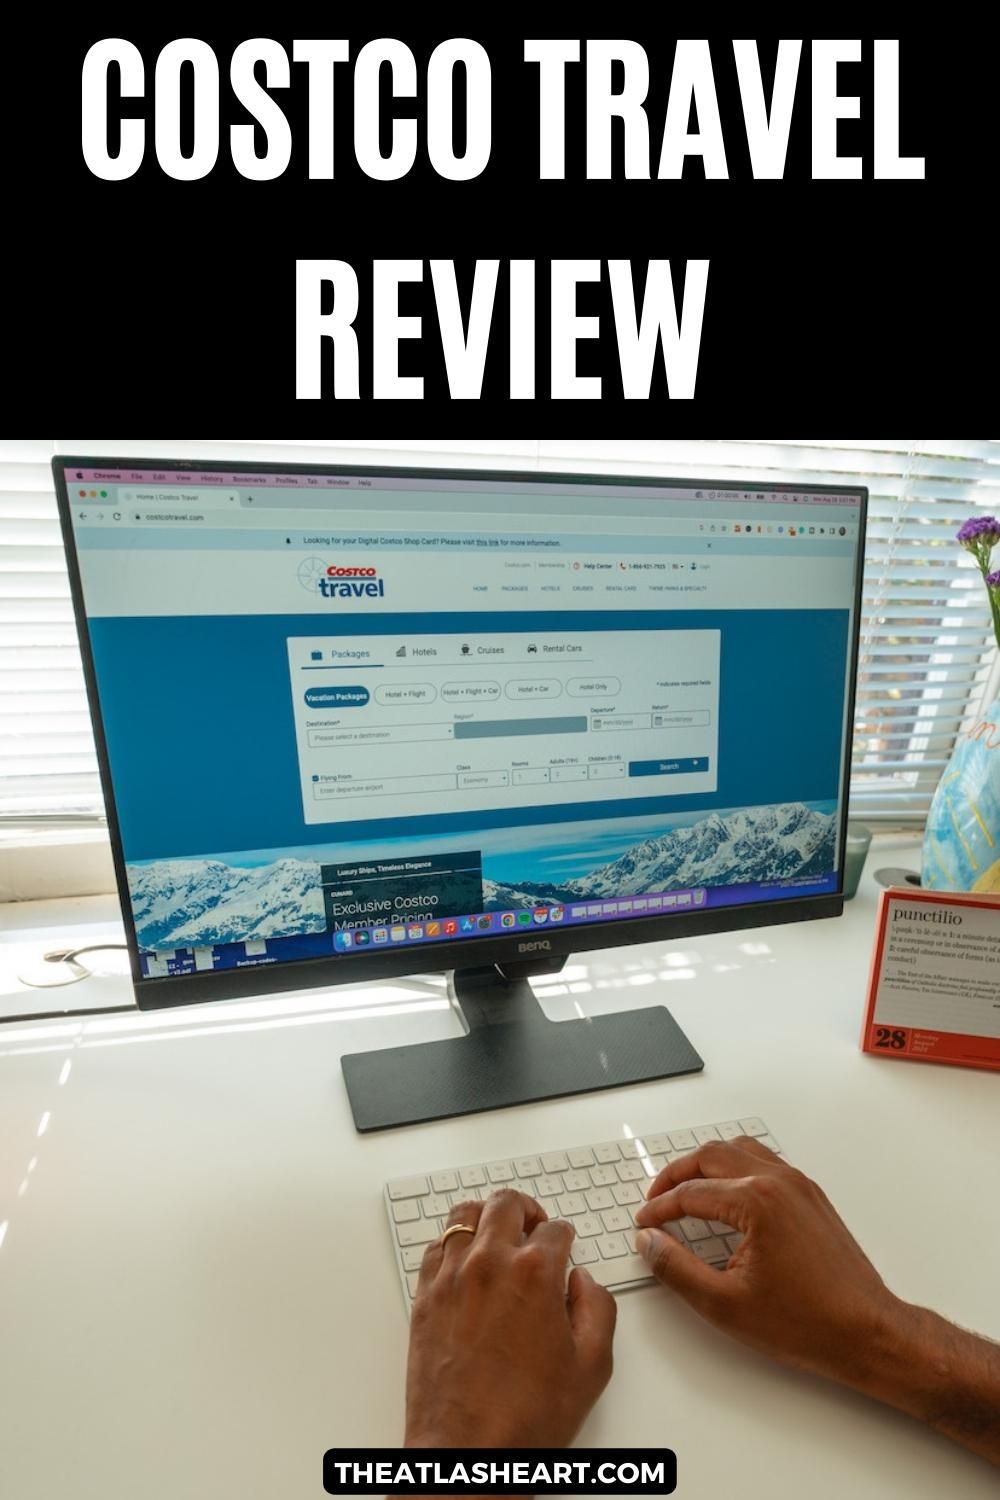 A pair of hands type on a keyboard in front of a monitor displaying the Costco Travel website sitting on a white desk, with the text overlay, "Costco Travel Review."